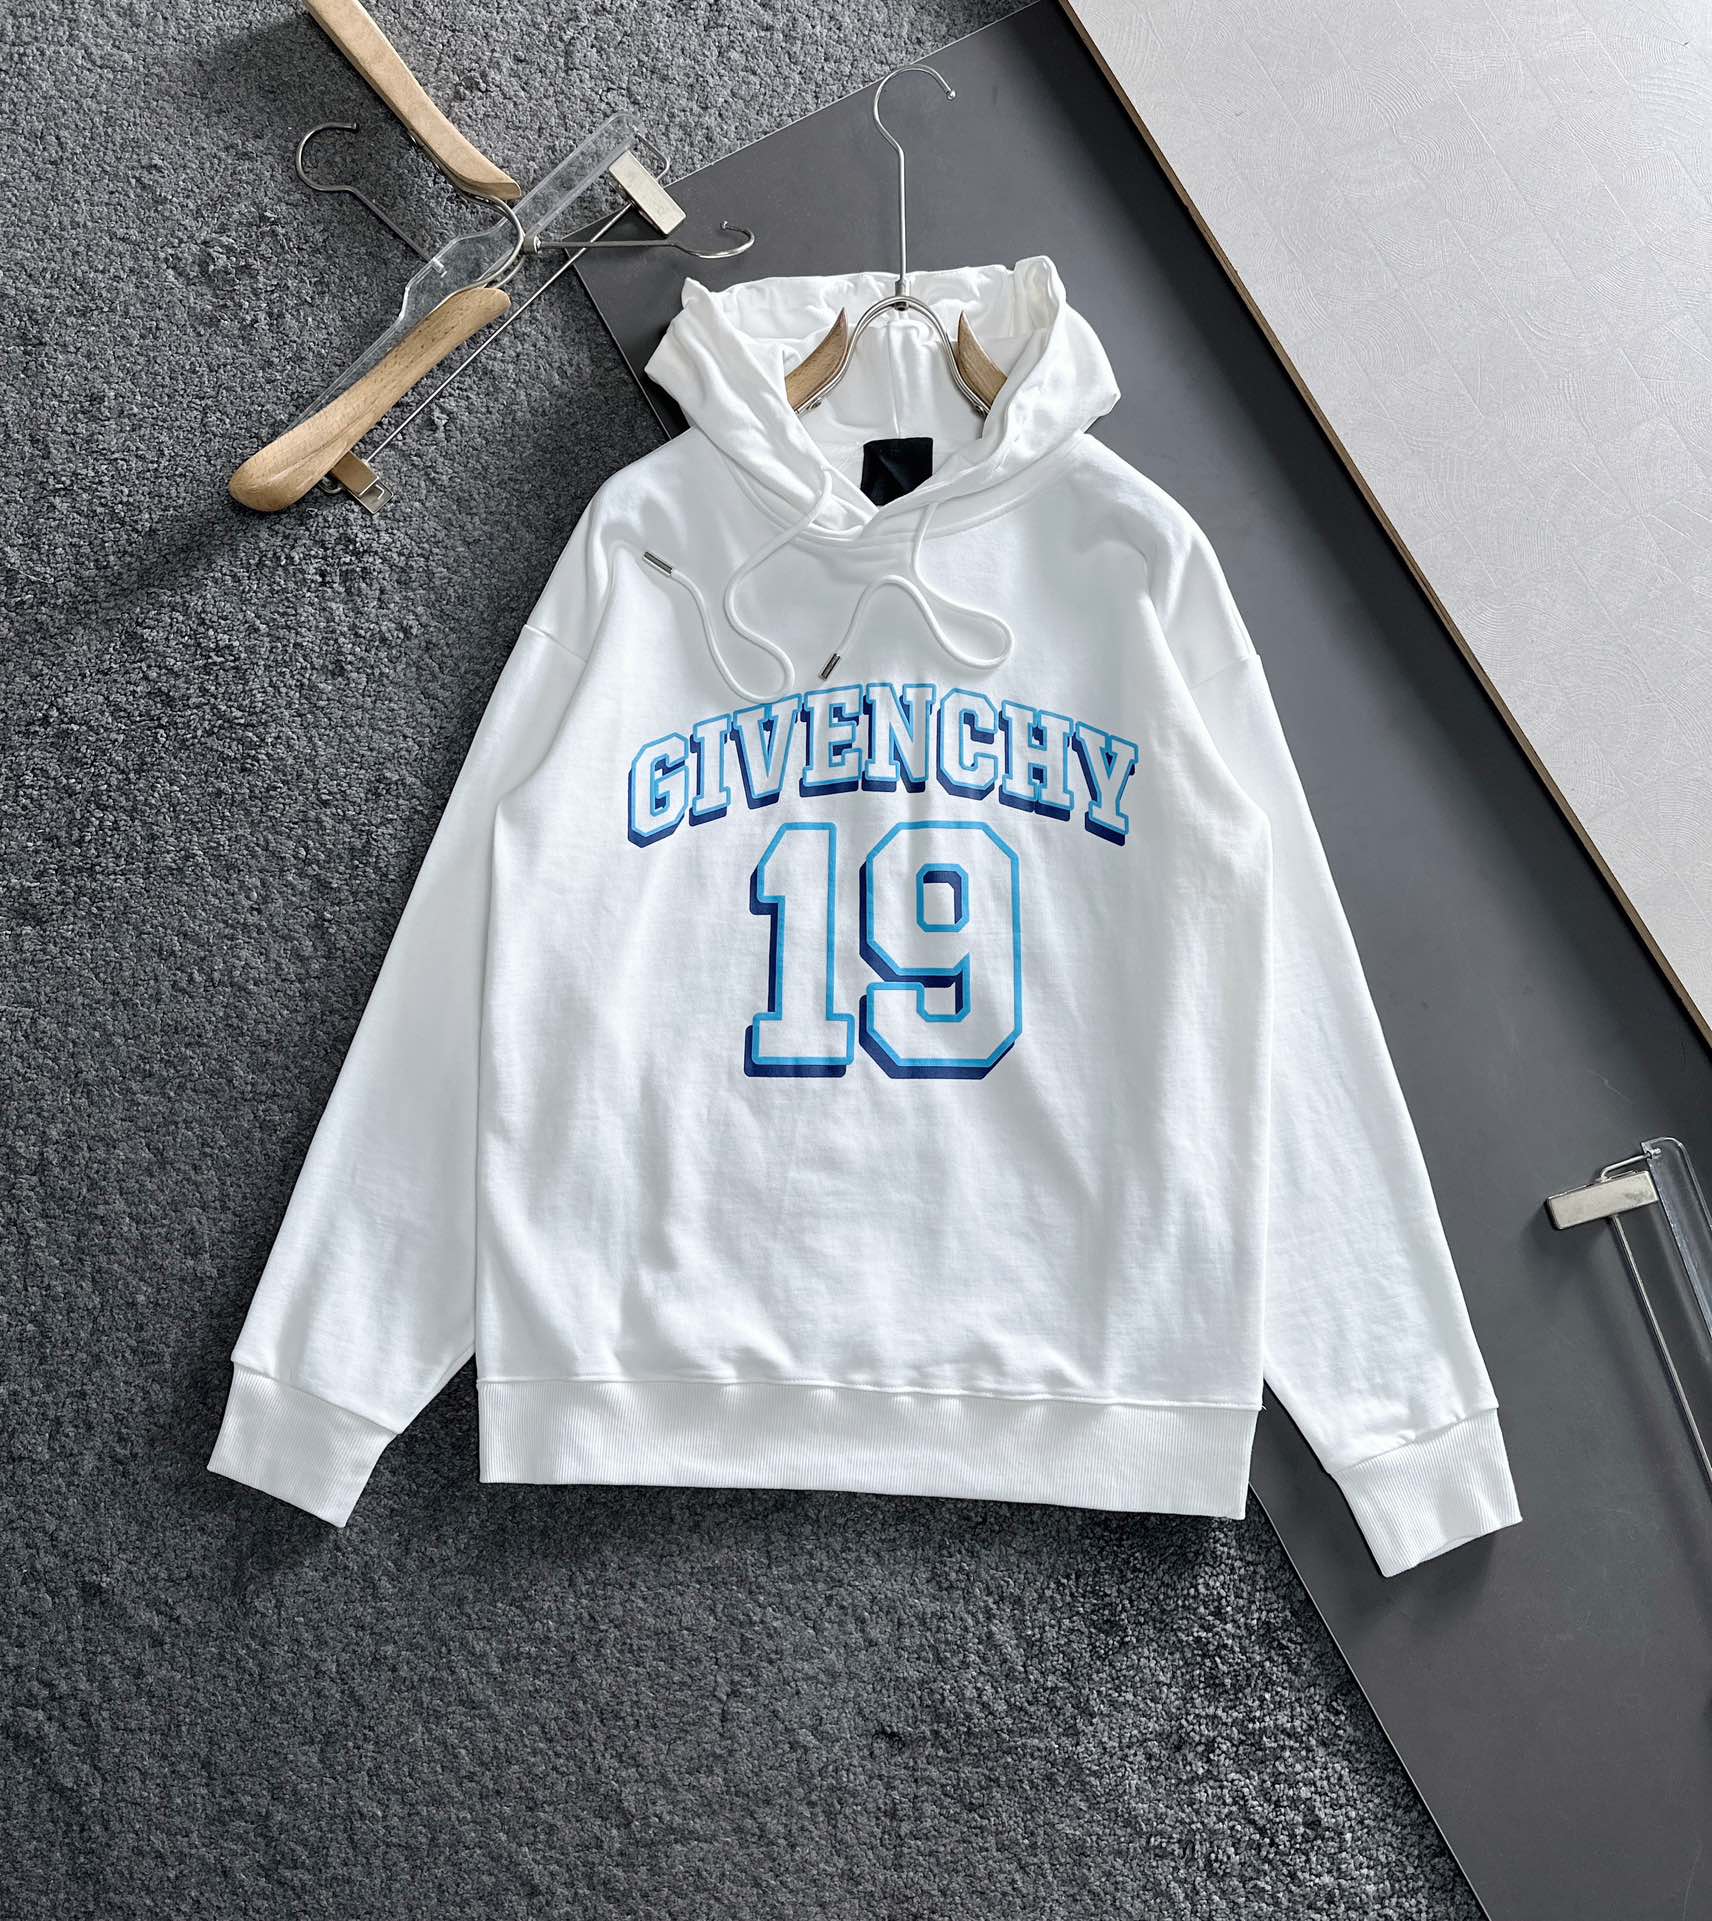 Givenchy Clothing Hoodies Black Printing Unisex Women Cotton Knitting Hooded Top